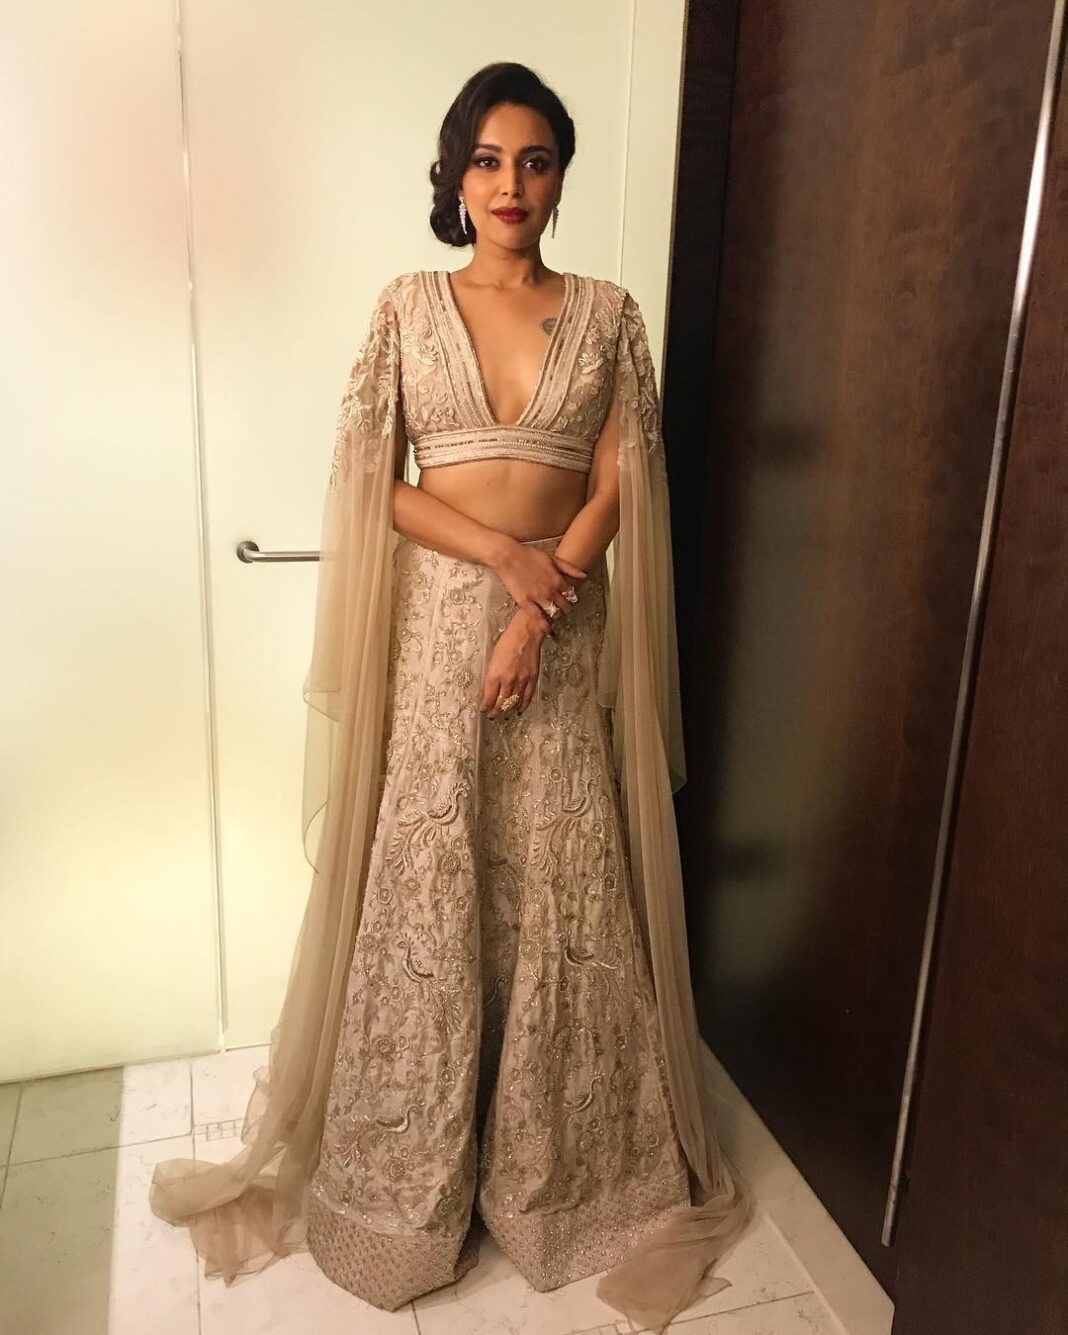 Swara Bhaskar Instagram - In @svacouture with @png_jewellers for the #dubai opening of #bharatthakur #bharatthakurart exhibition 'Between Crest and Trough' .. #art #travel #culture #thethingsthatmatter #thecharmedlife Styled by @dibzoo assisted by @vidhirambhia HMU: @ambereen01 ❤️❤️❤️ Dubai, United Arab Emitates